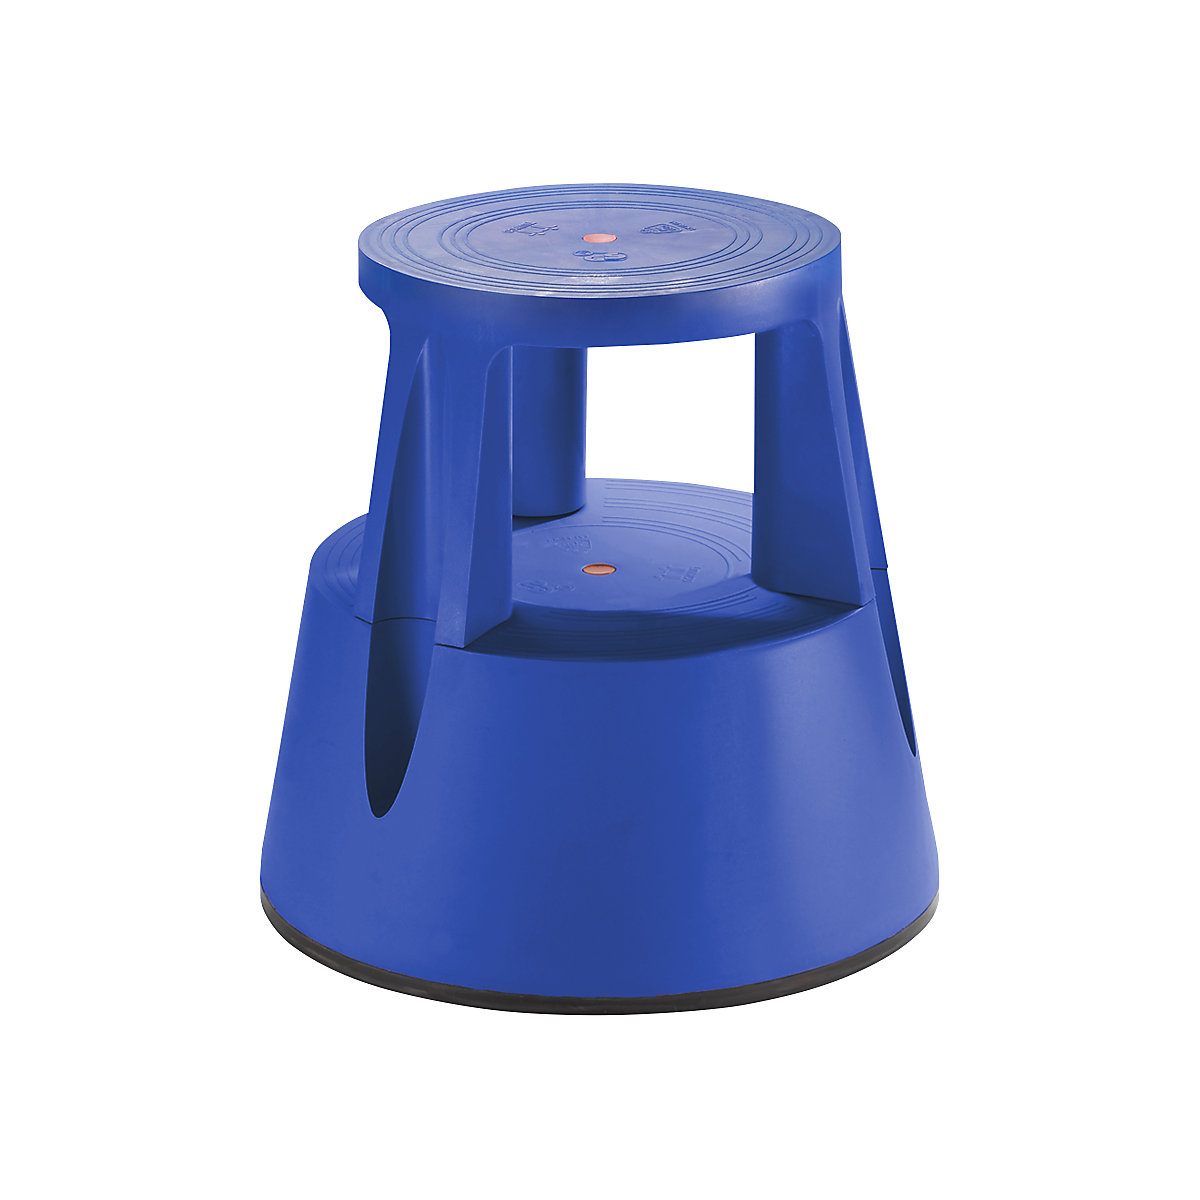 Kick stool made of shatterproof plastic – Twinco, max. load 150 kg, height under load 410 mm, blue-3